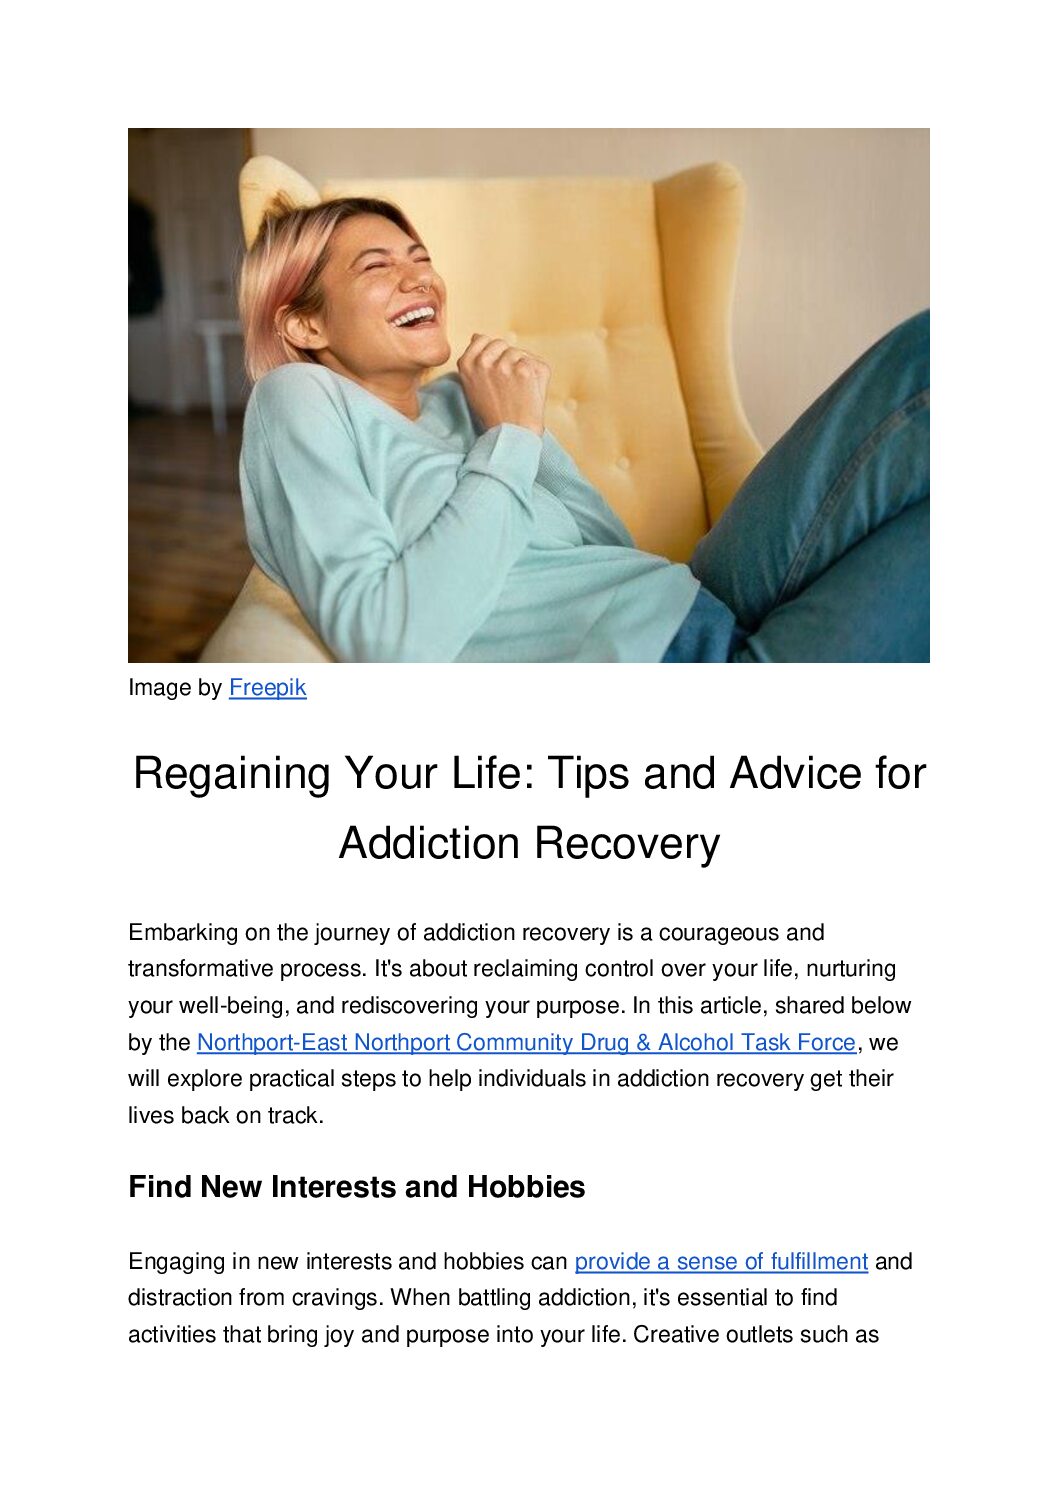 Regaining Your Life: Tips & Advice for Addiction Recovery